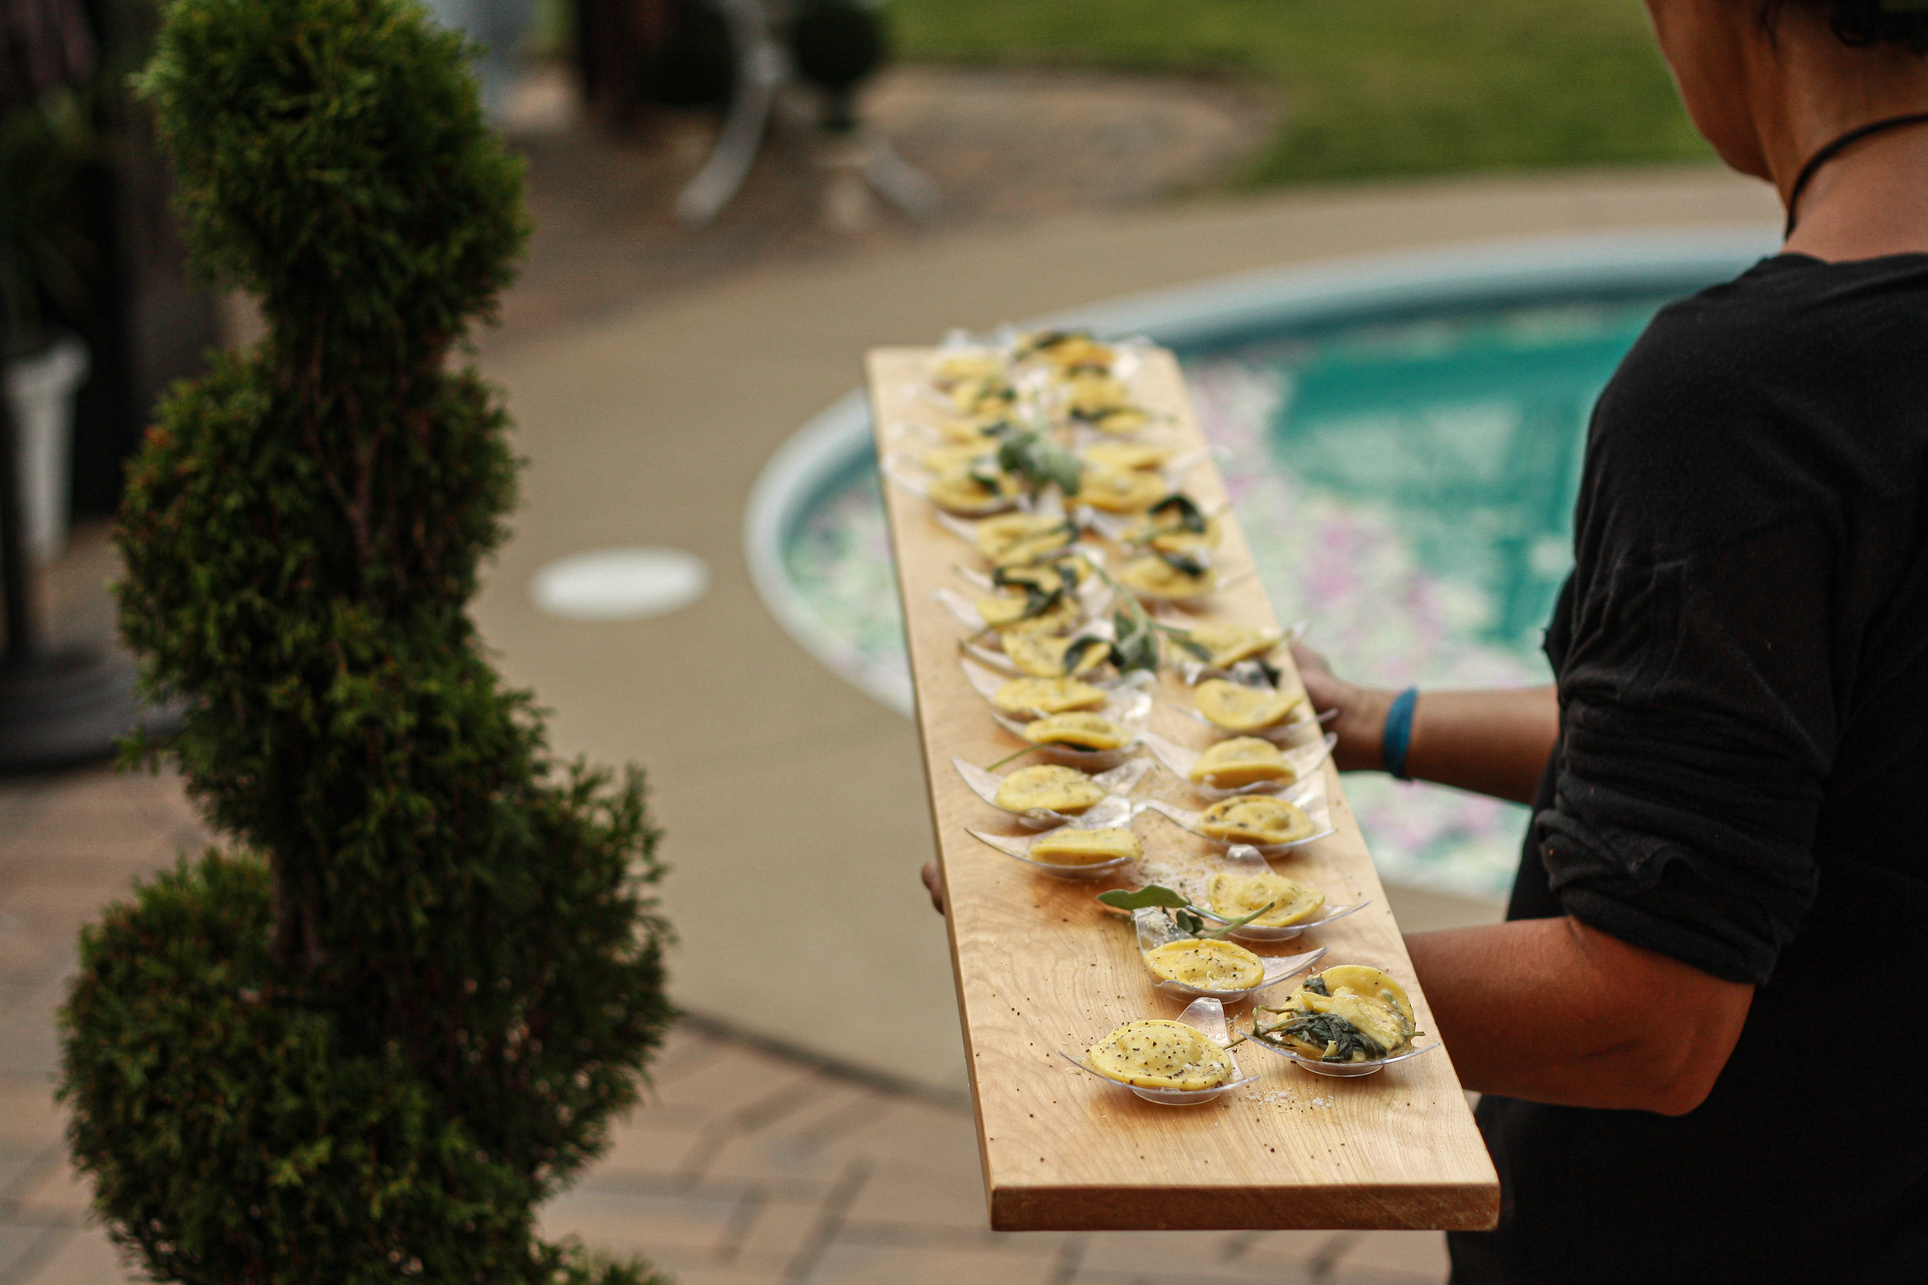 Homemade ravioli catering for private events